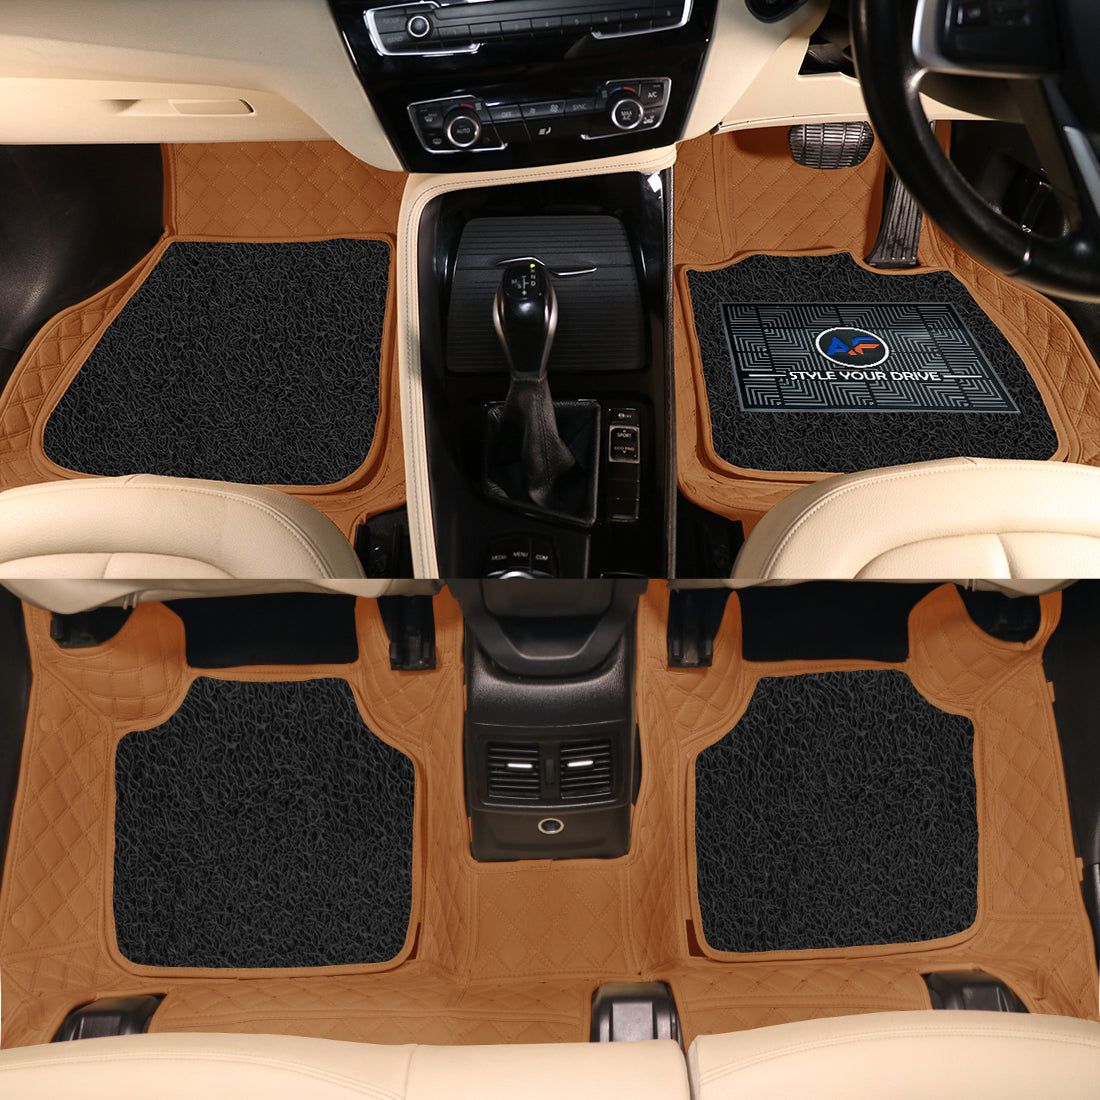 Jeep Grand Cherokee 2019 7D Luxury Car Mat, All Weather Proof, Anti-Skid, 100% Waterproof & Odorless with Unique Diamond Fish Design (24mm Luxury PU Leather, 2 Rows)